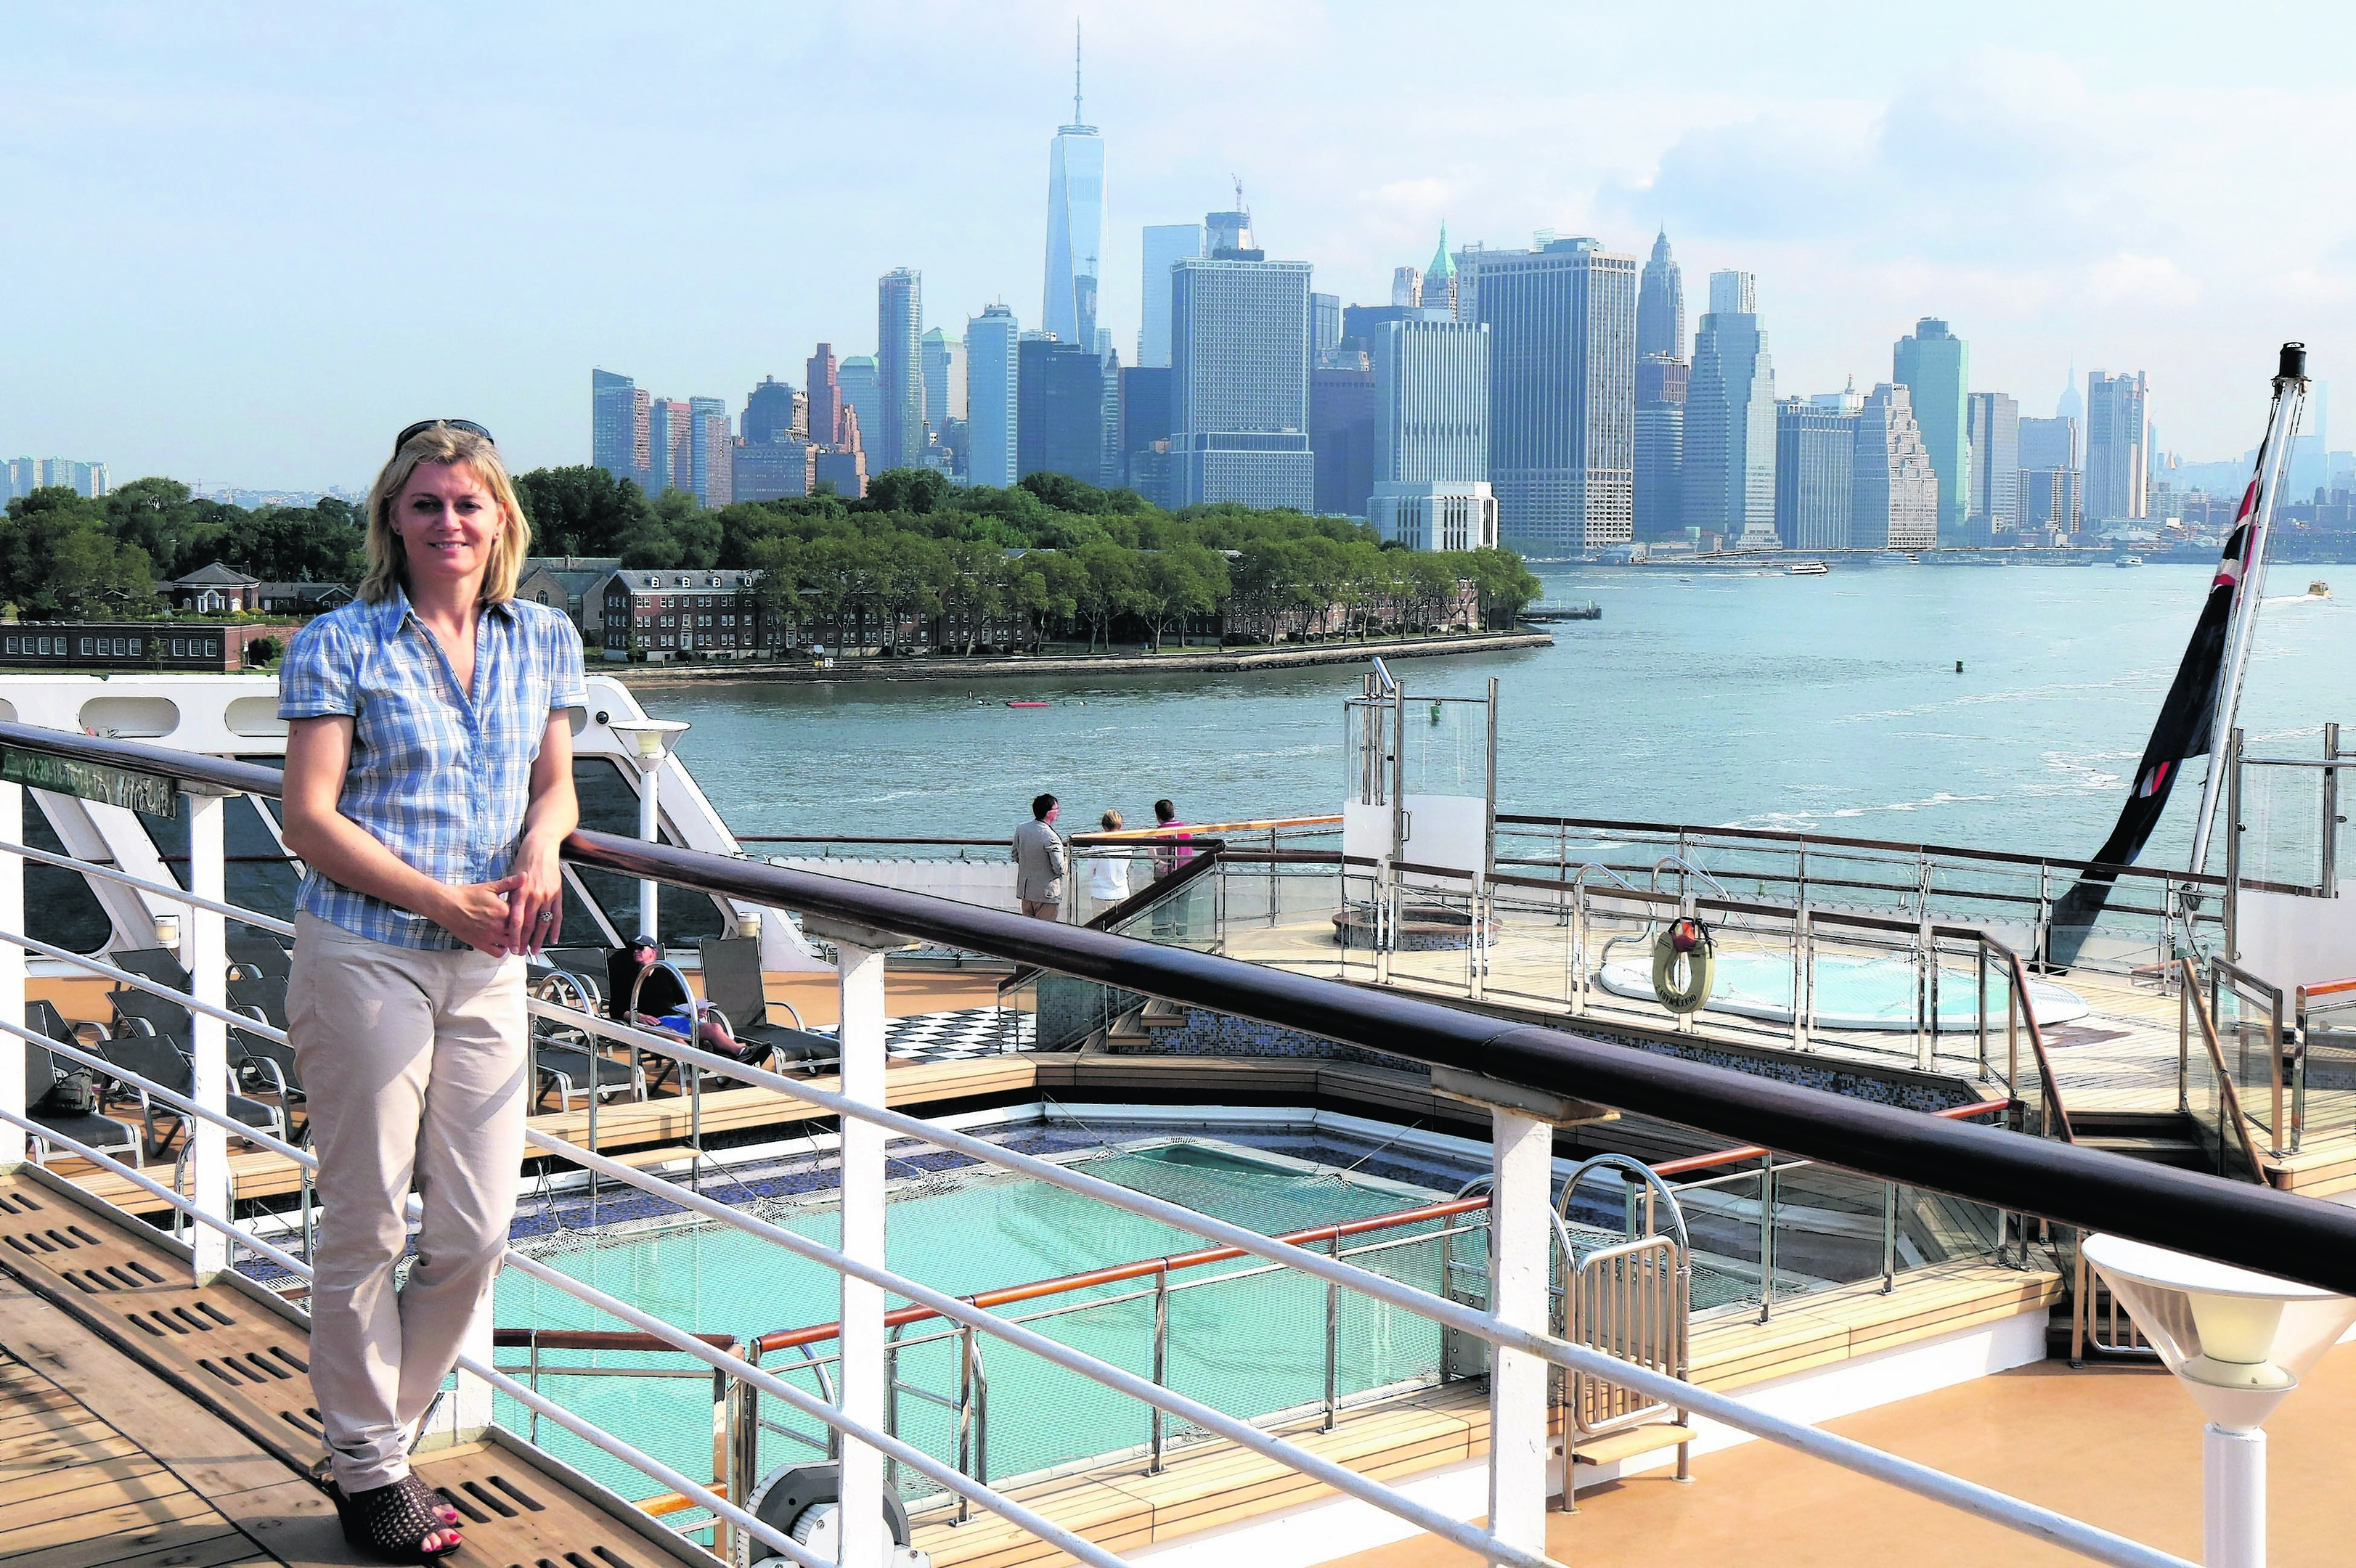 Karen Bowerman on the Queen Mary 2 as she arrives in New York City